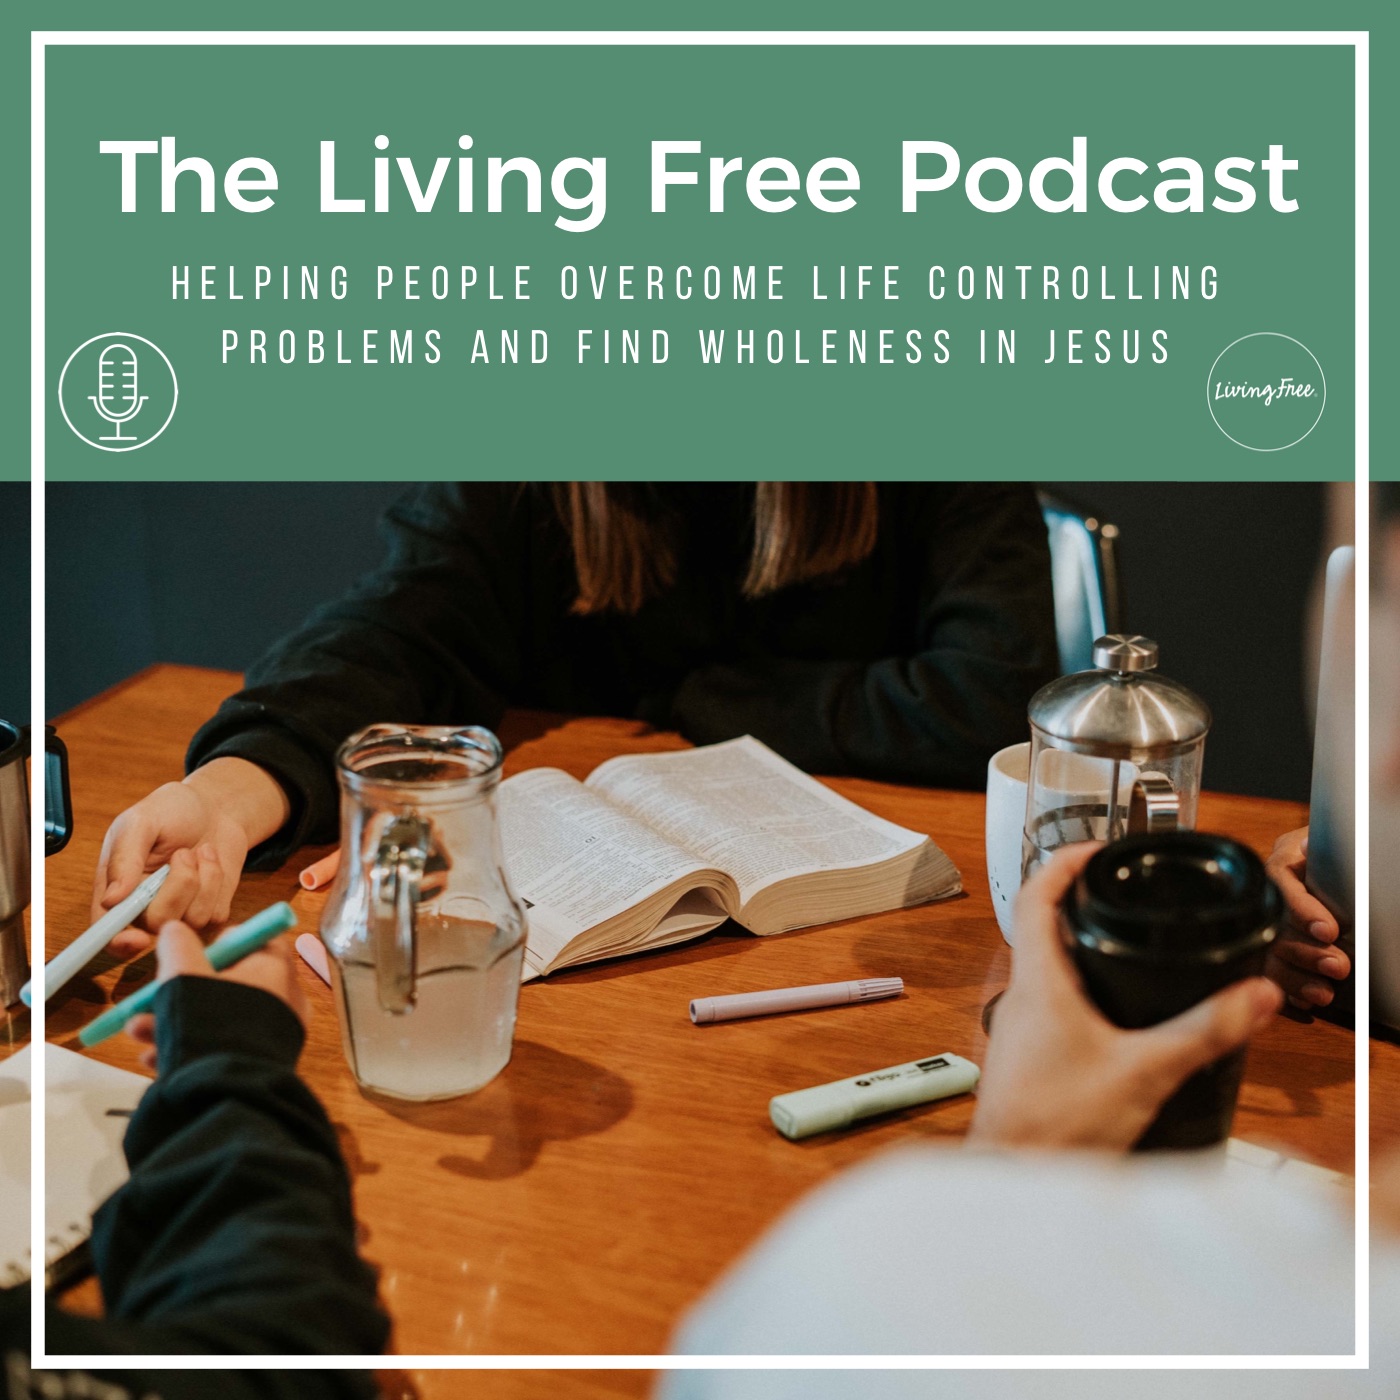 The Living Free Podcast